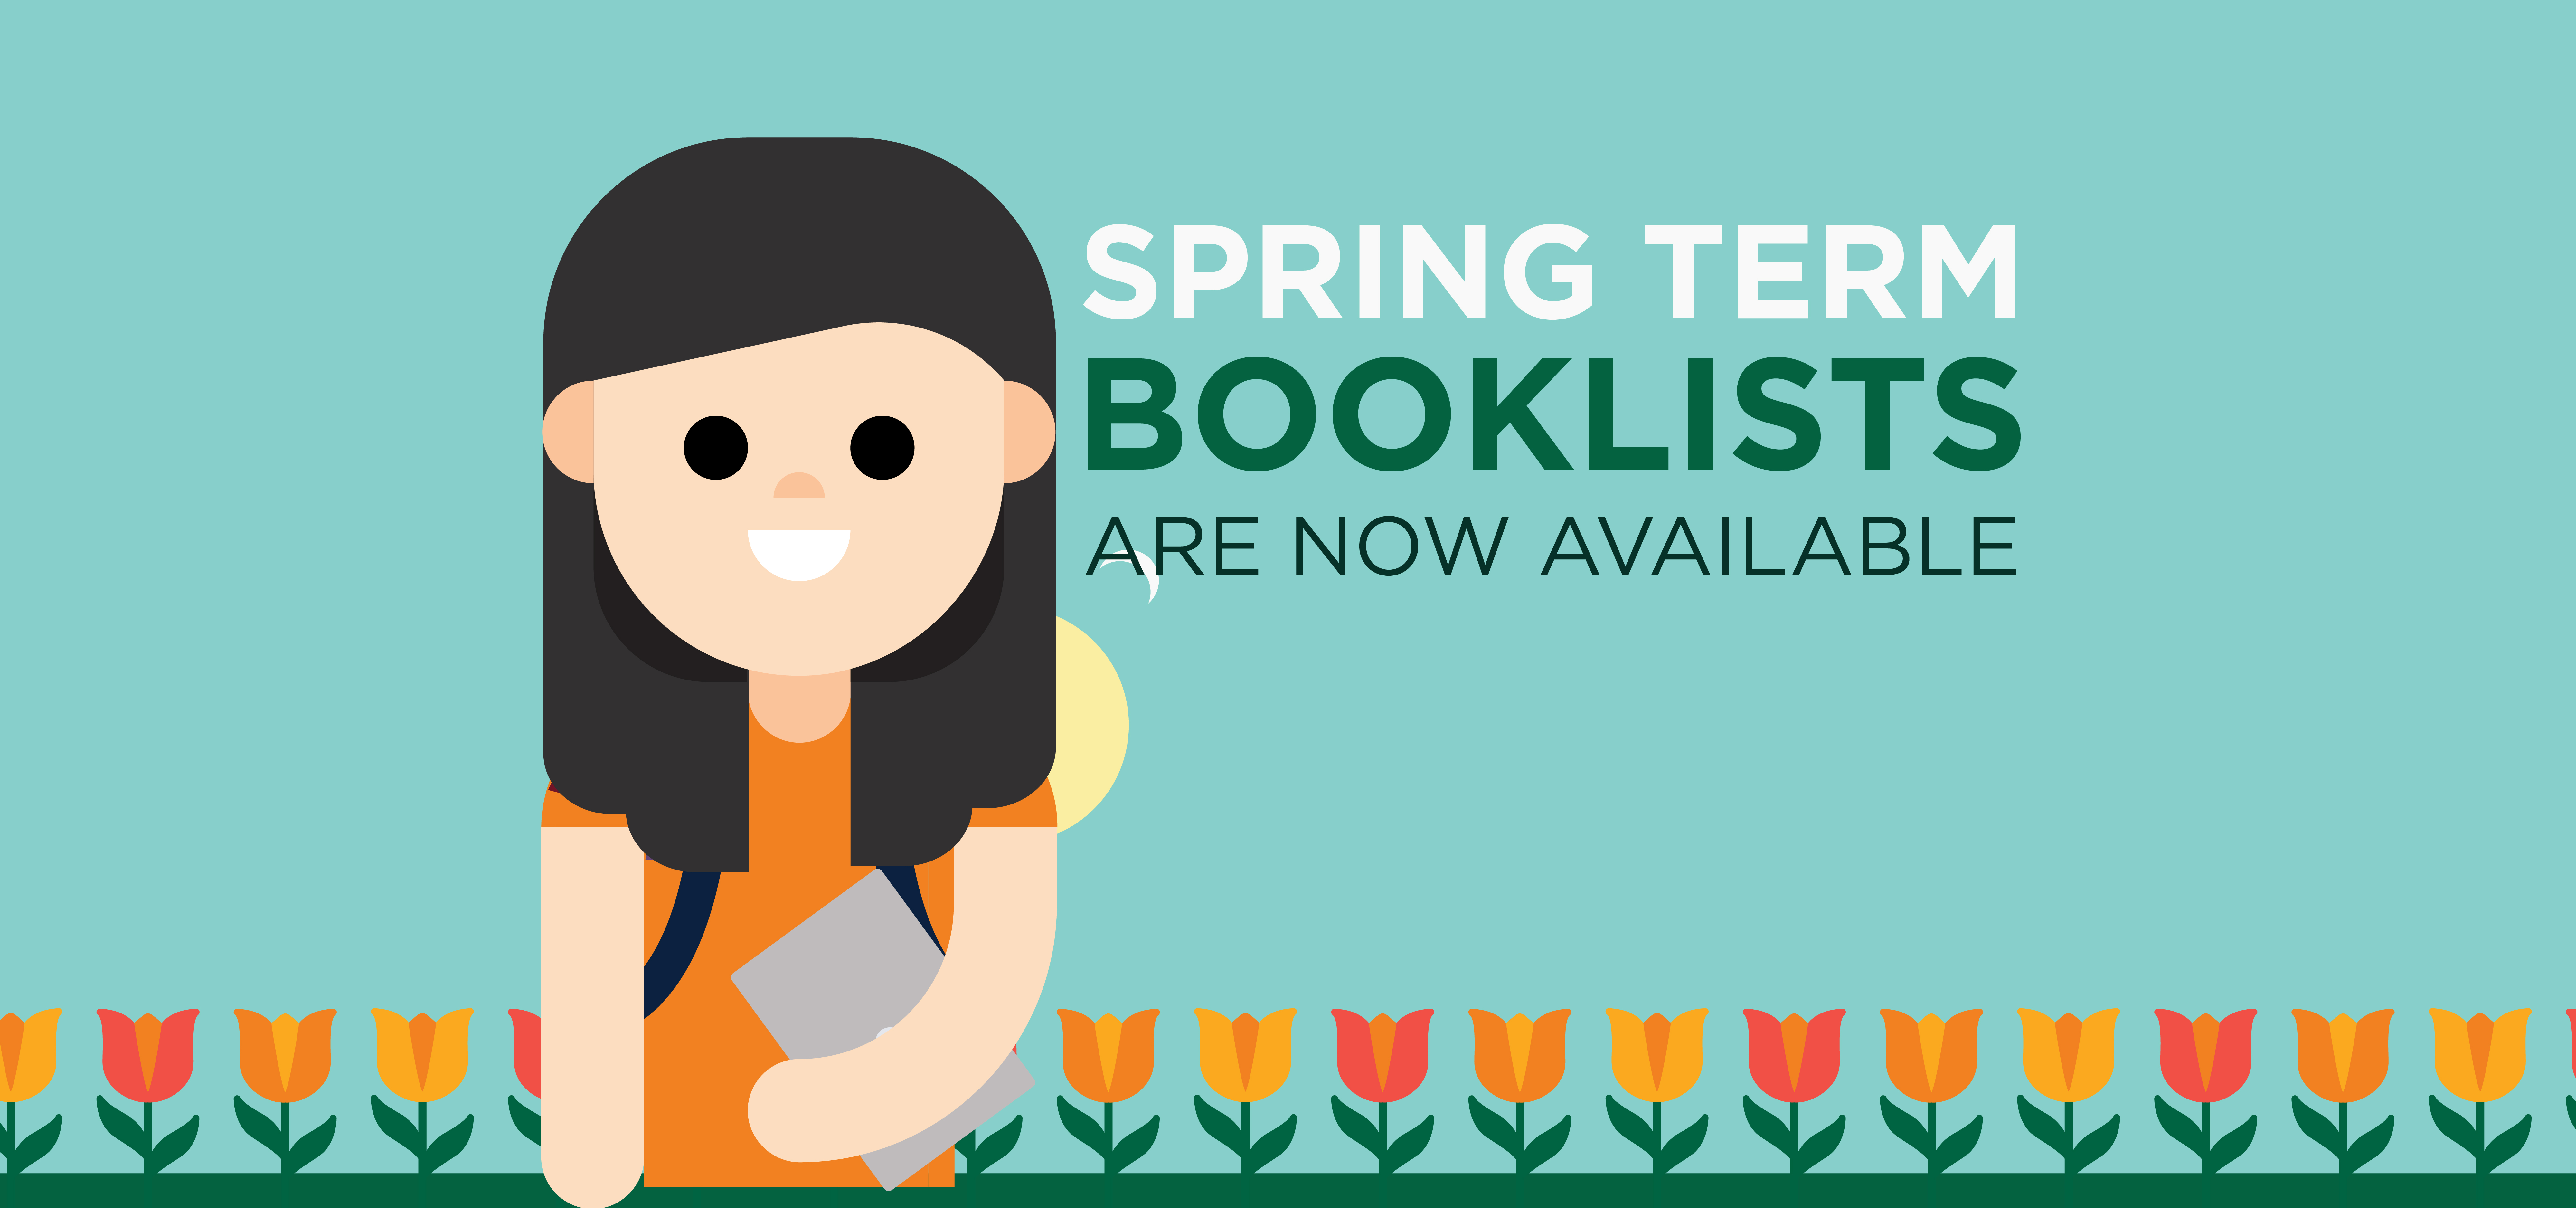 Spring Term Booklists Now Available